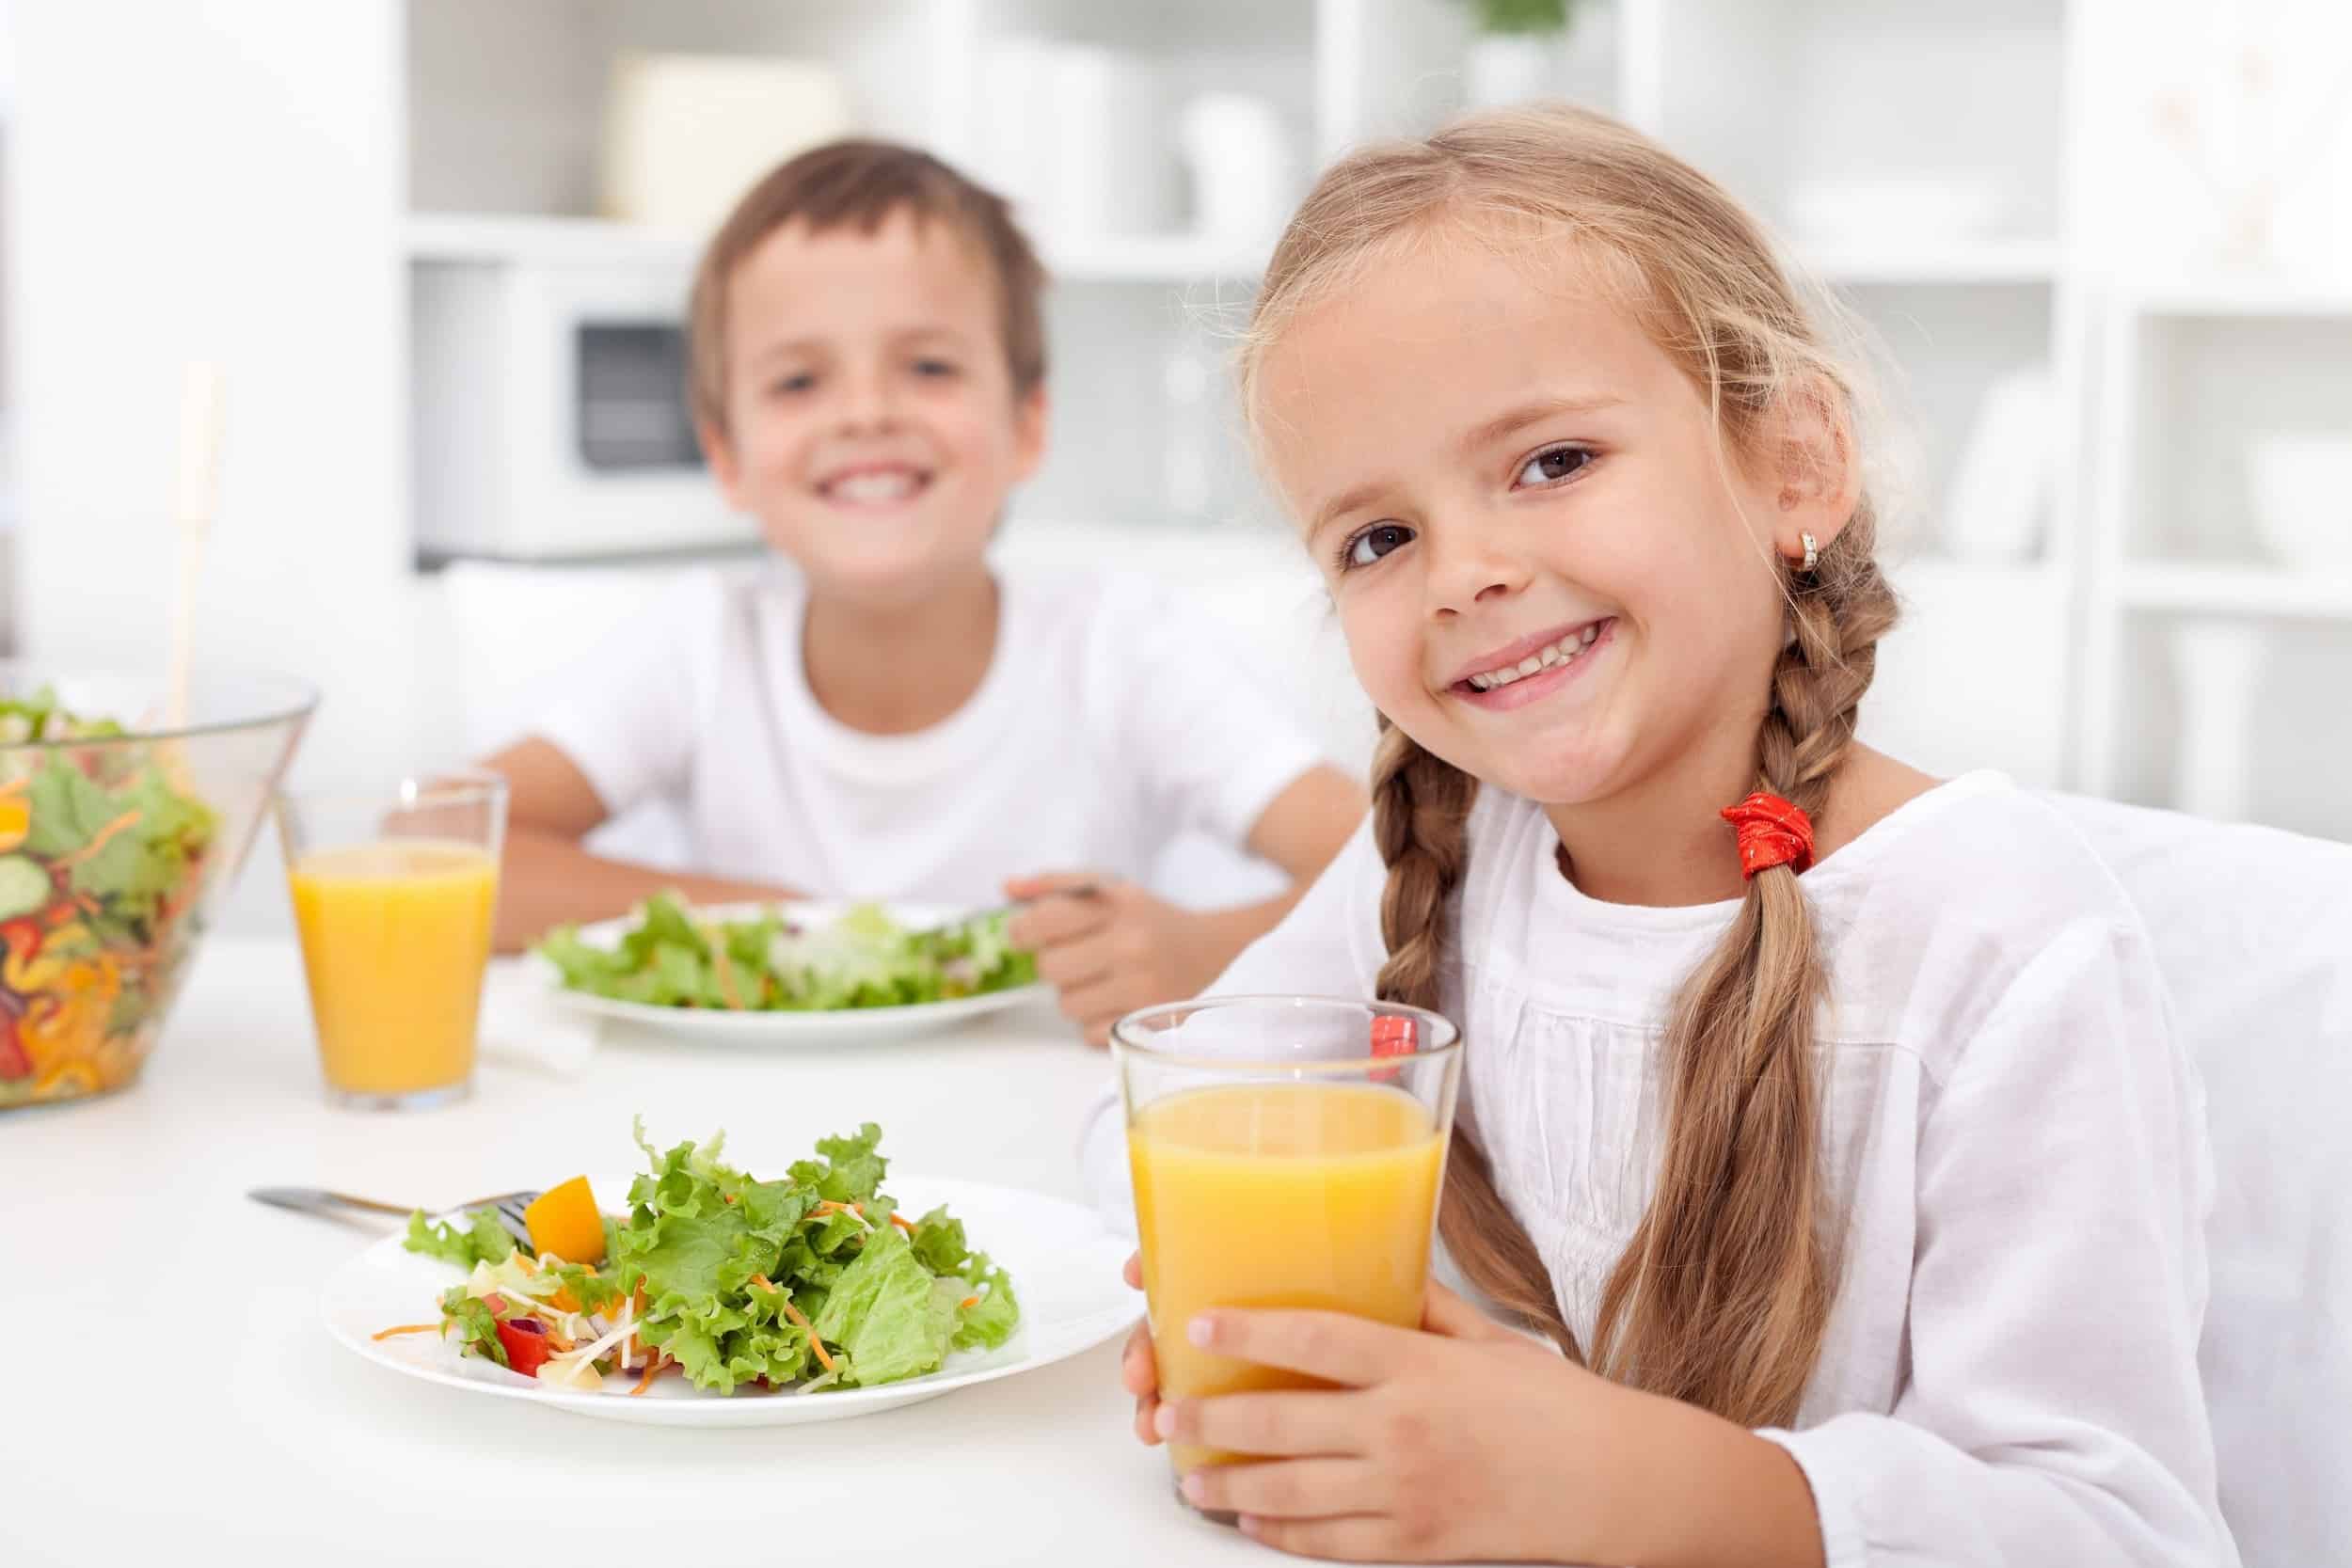 7 Tips for Dealing with Vegetarian Children